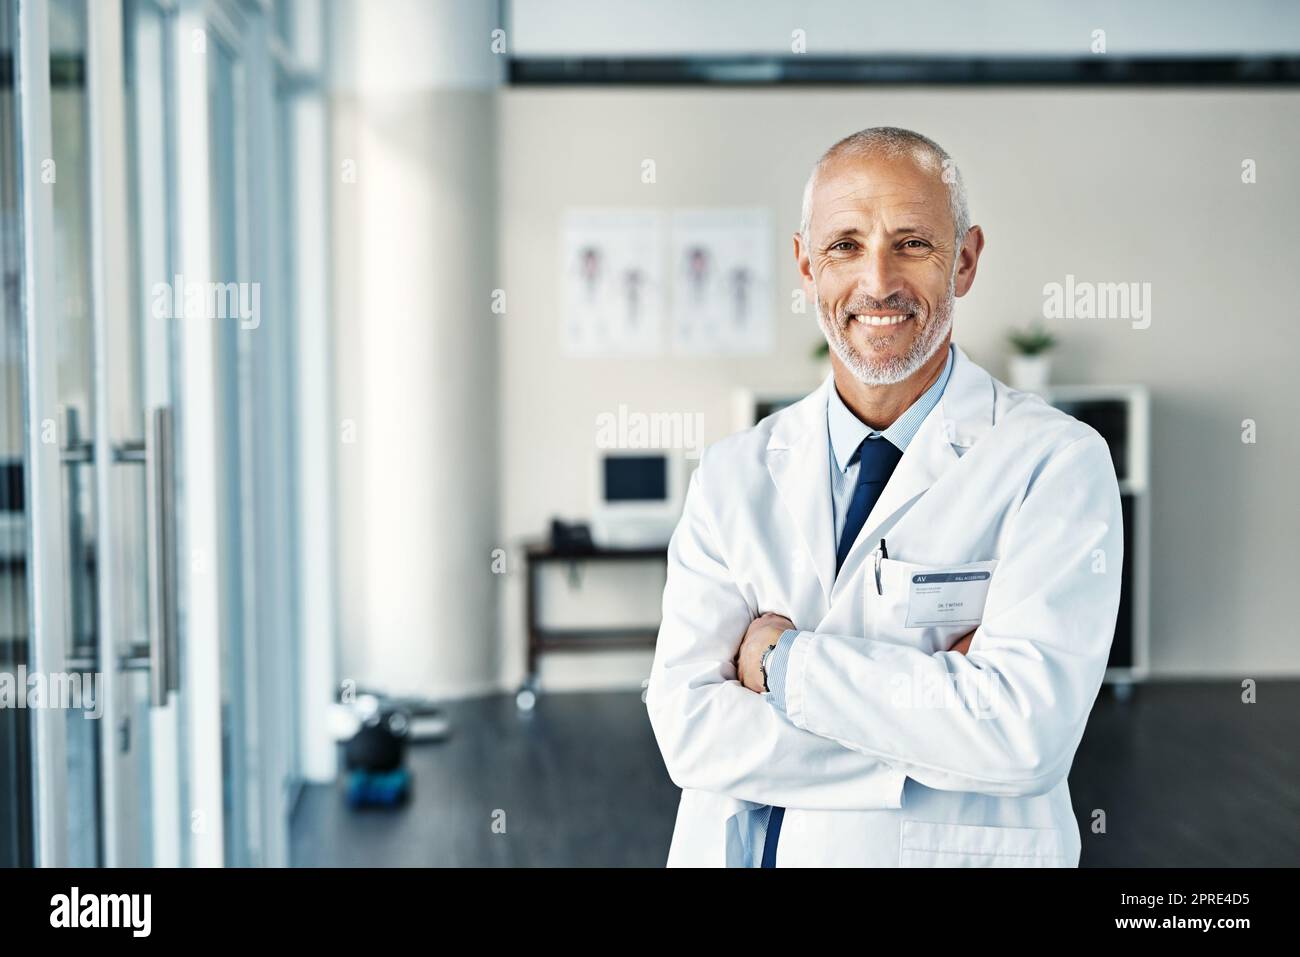 Your wellbeing is my top concern. Portrait of a mature doctor standing in a hospital. Stock Photo